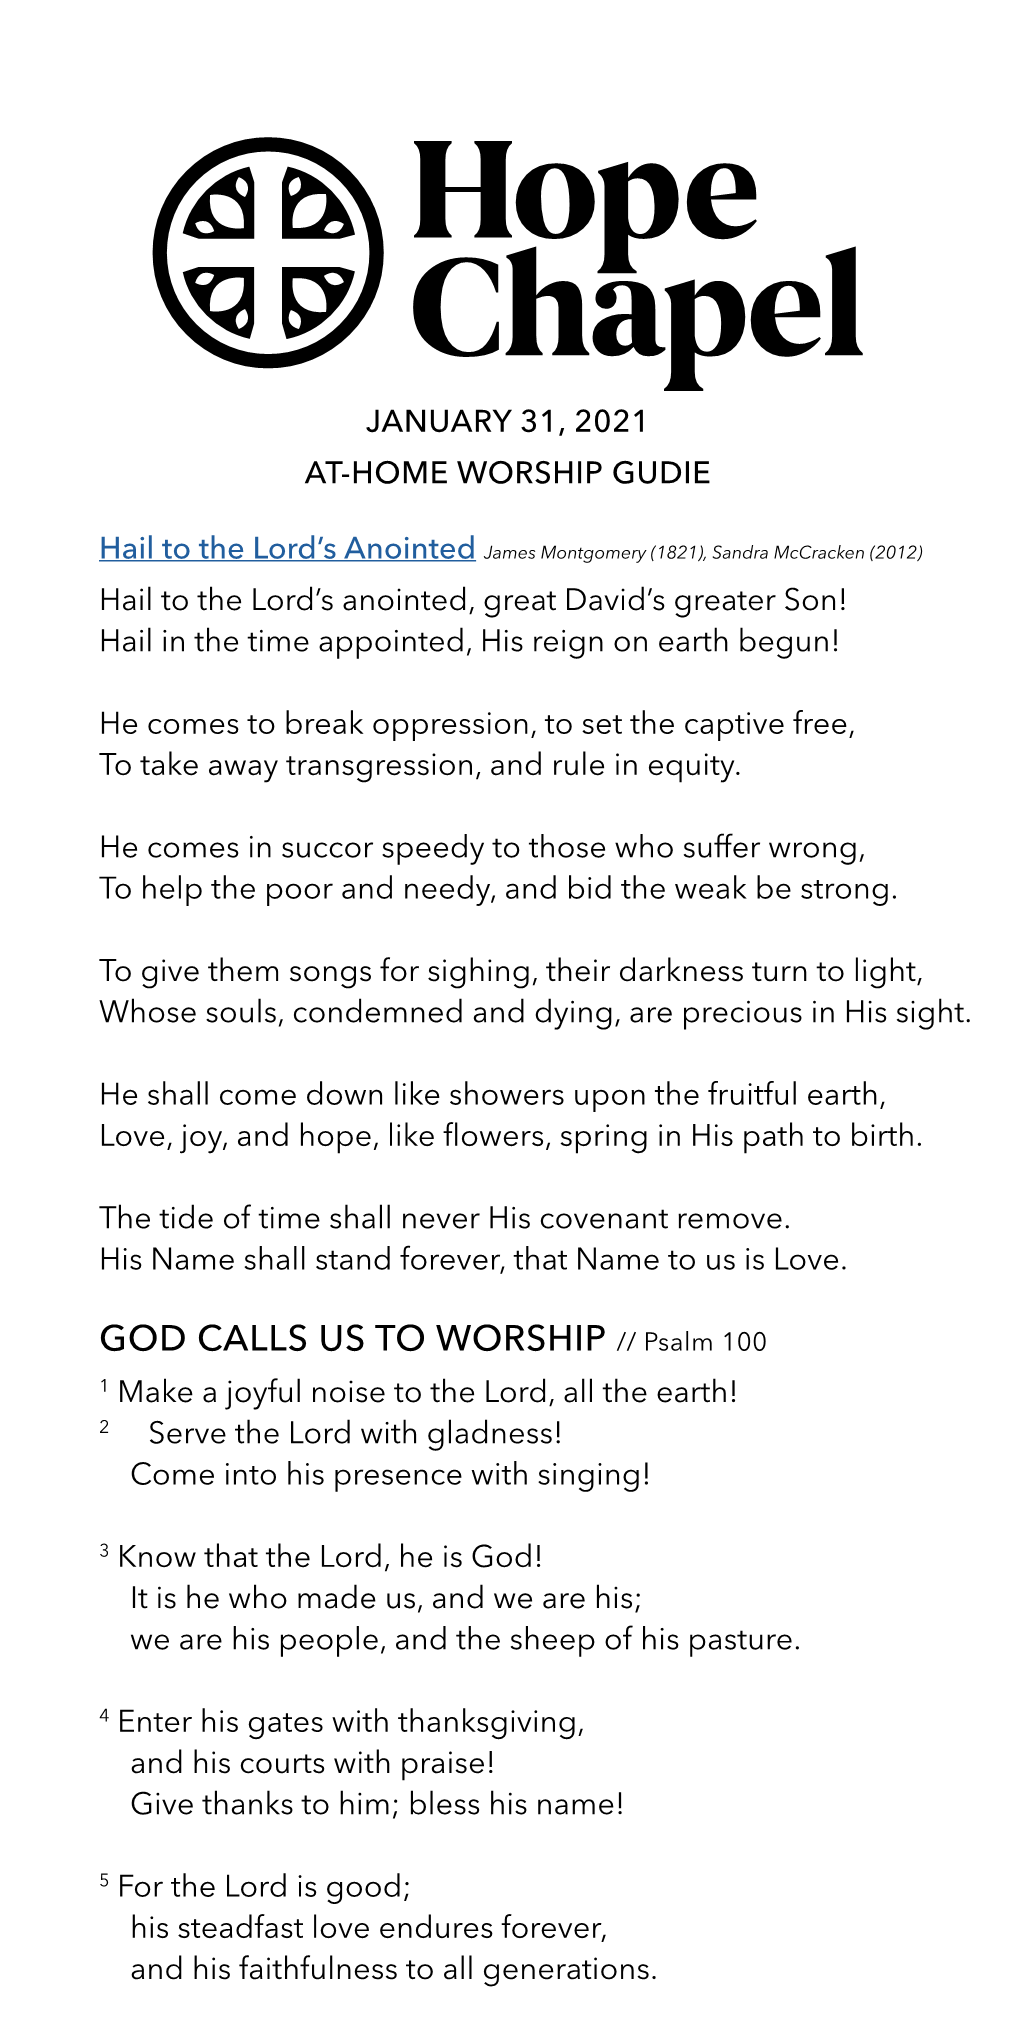 GOD CALLS US to WORSHIP // Psalm 100 1 Make a Joyful Noise to the Lord, All the Earth! 2 Serve the Lord with Gladness! Come Into His Presence with Singing!